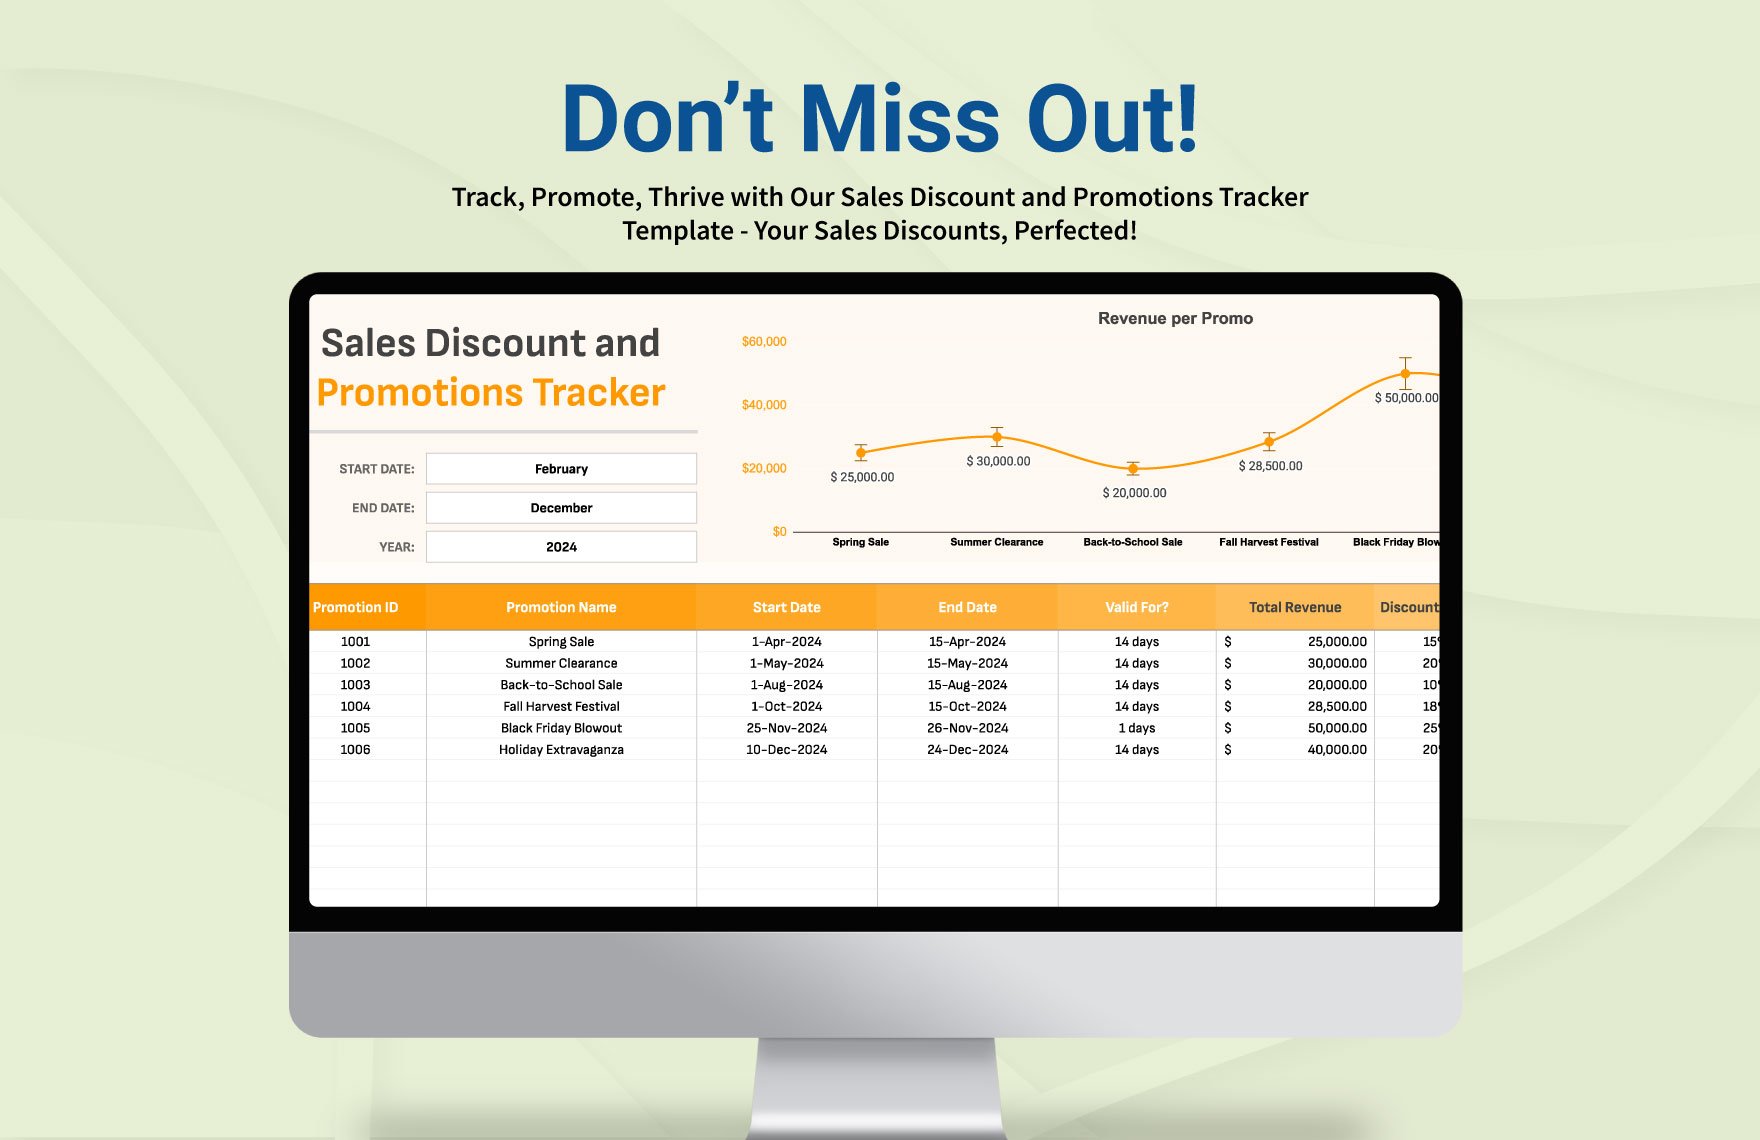 Sales Discount and Promotions Tracker Template